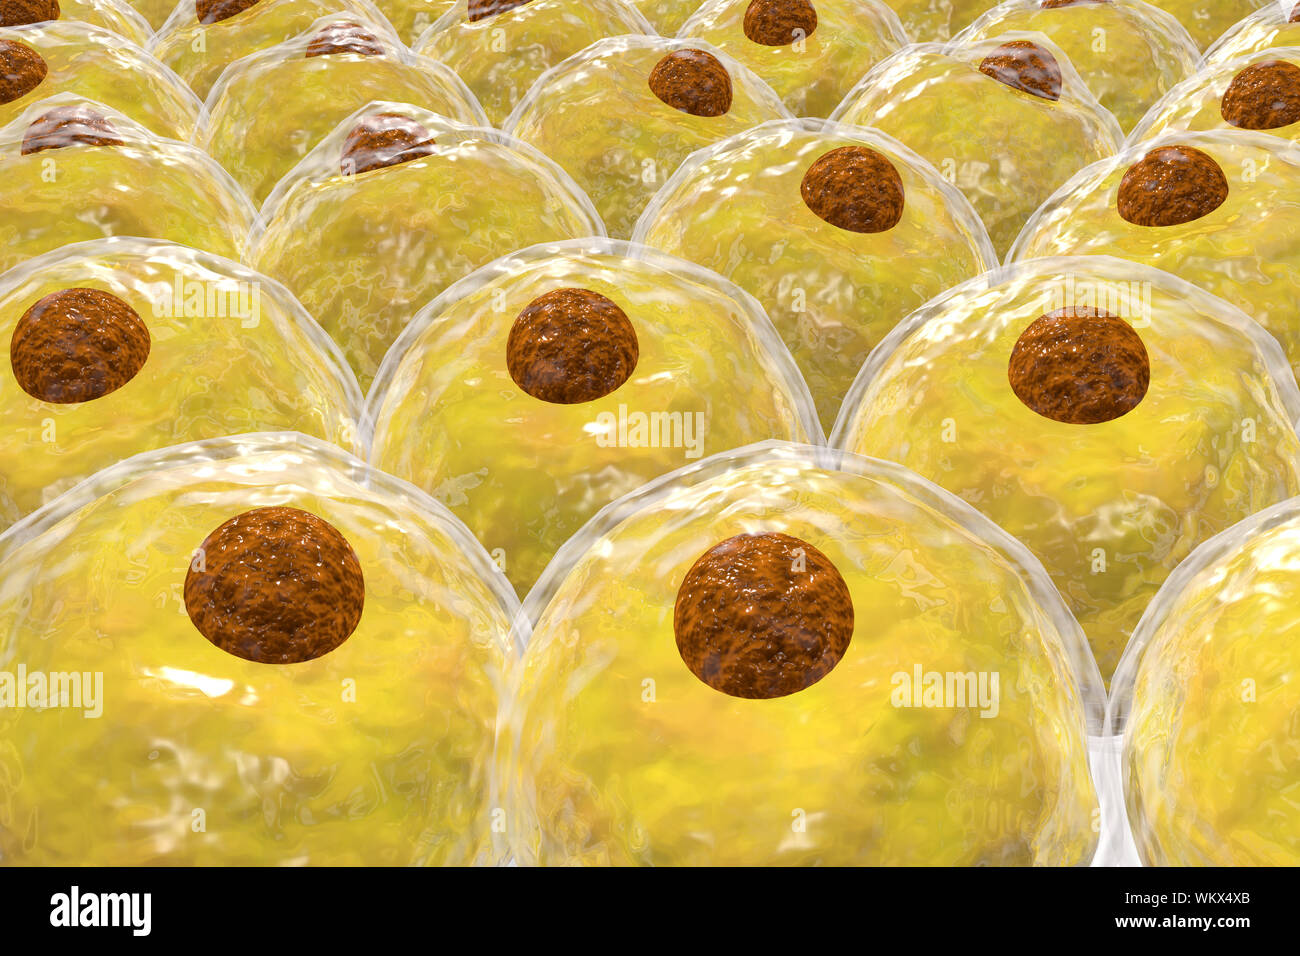 Healthy white human fat cells also known as adipocytes 3d illustration Stock Photo